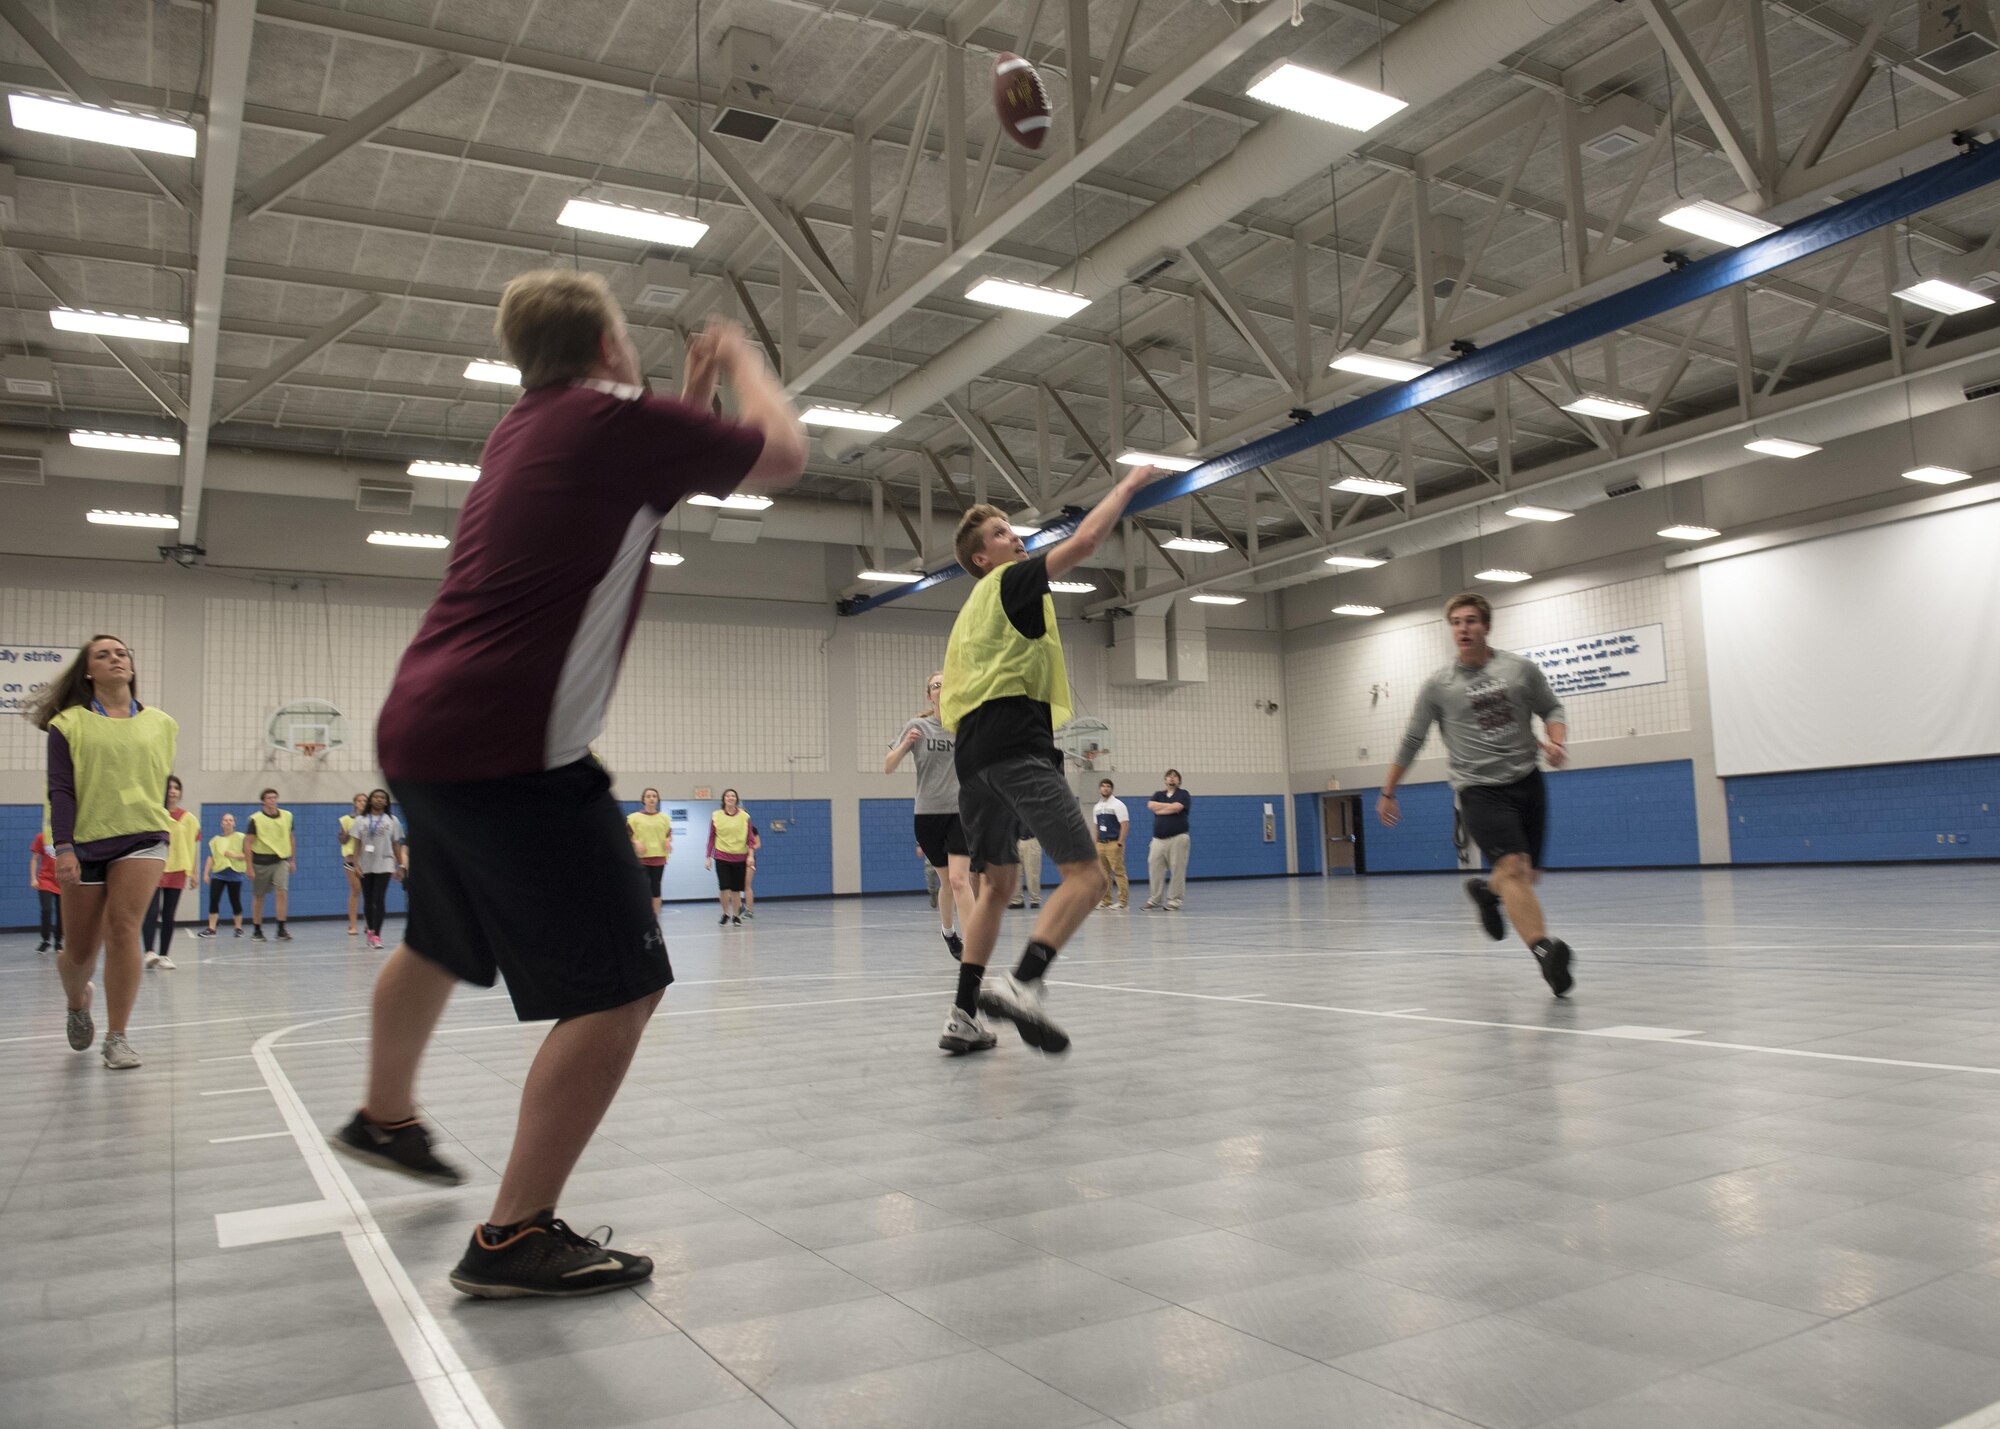 Students with Youth Leadership Blount play flicker ball in the Wilson Hall activities building during a tour at the Air National Guard’s I.G. Brown Training and Education Center April 18, 2017, as part of their leadership day. The students also met the commander, took a 4 Lenses assessment, and toured the TEC TV studios before leaving McGhee Tyson Air National Guard Base for other area events. (U.S. Air National Guard photo by Master Sgt. Mike R. Smith)